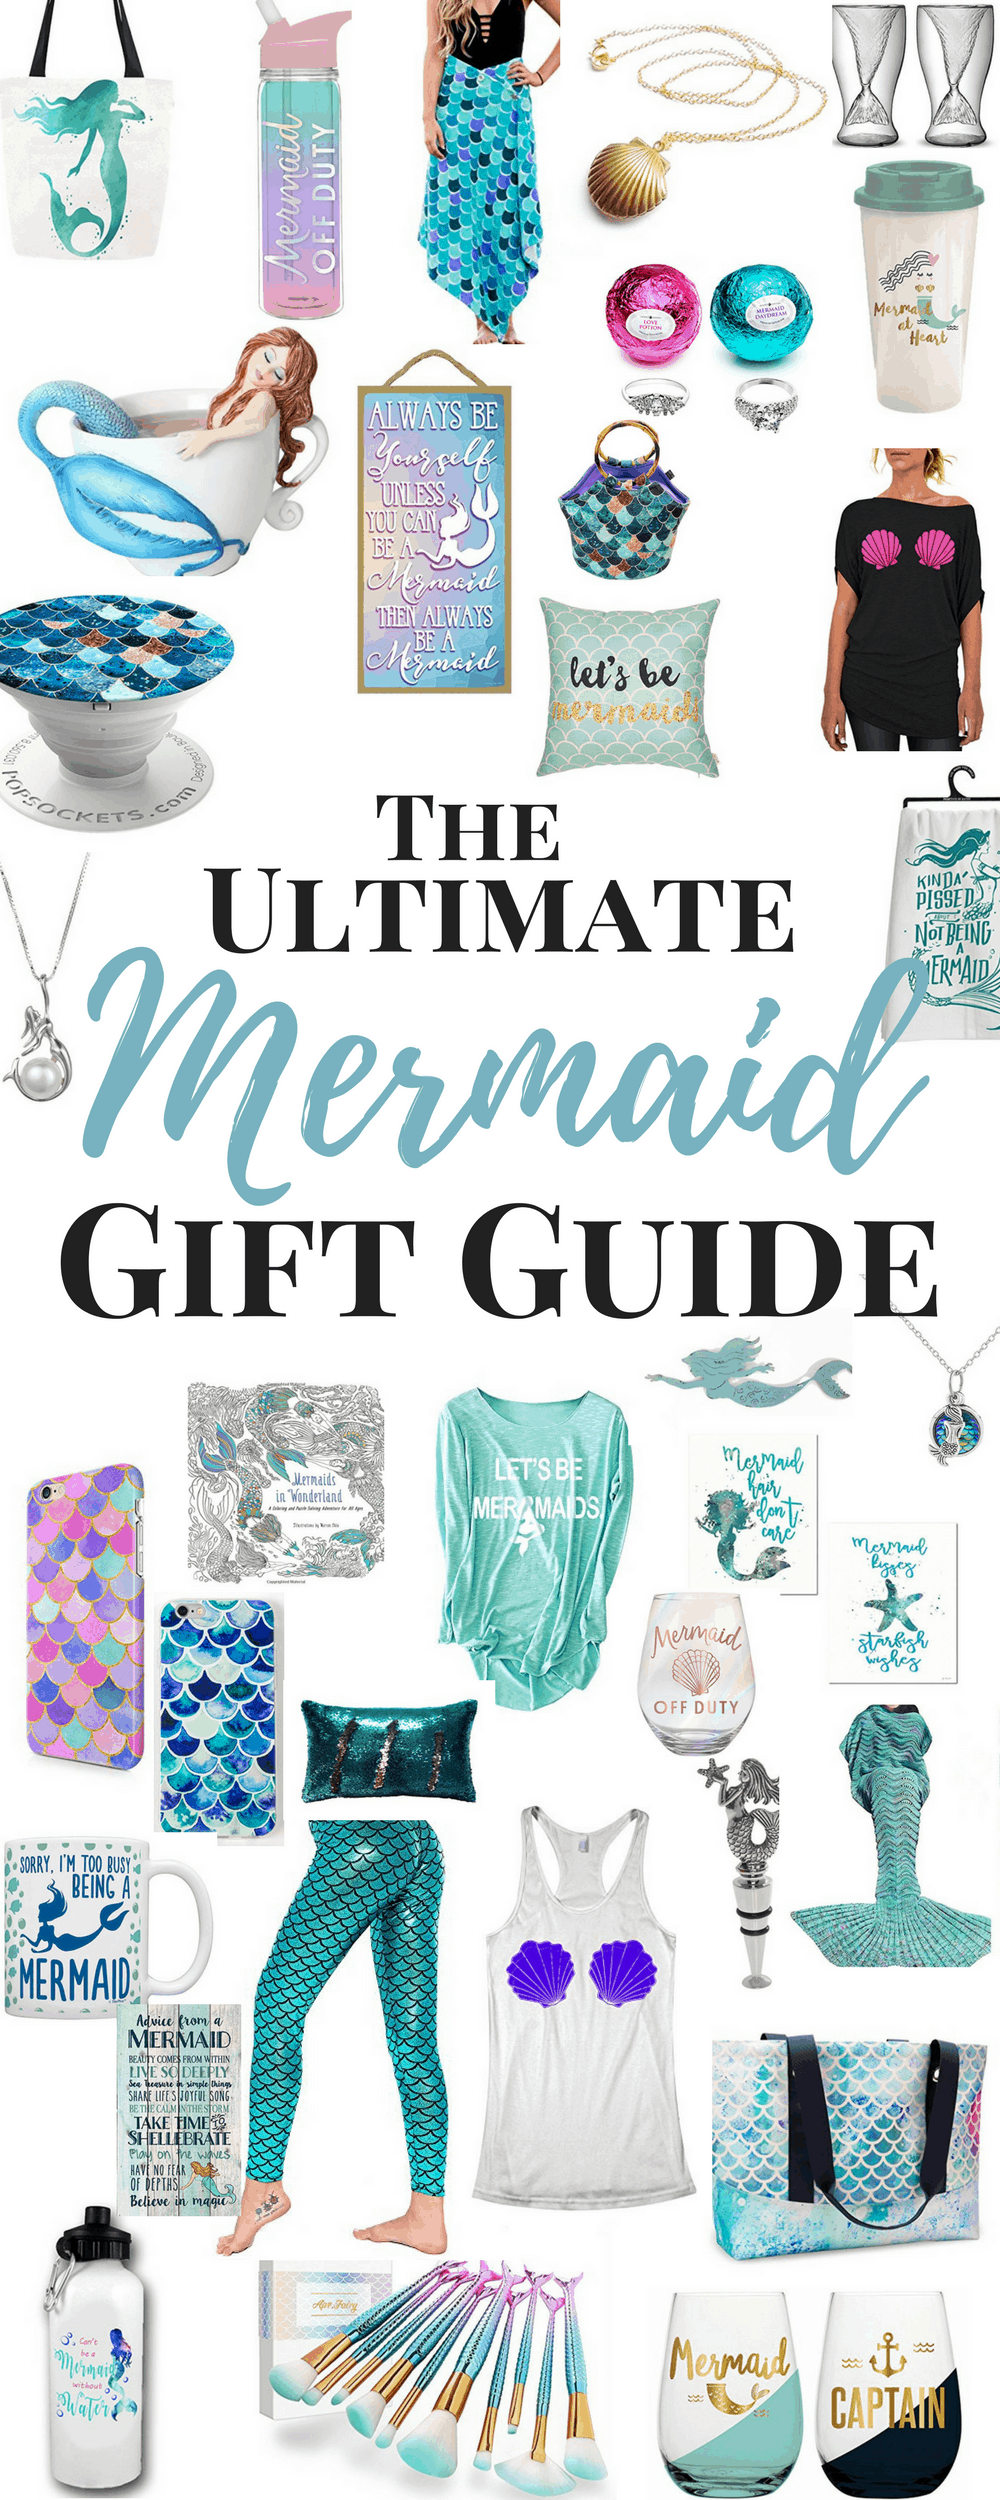 Best Mermaid Gifts For Girls and Adults too! - ourkindofcrazy